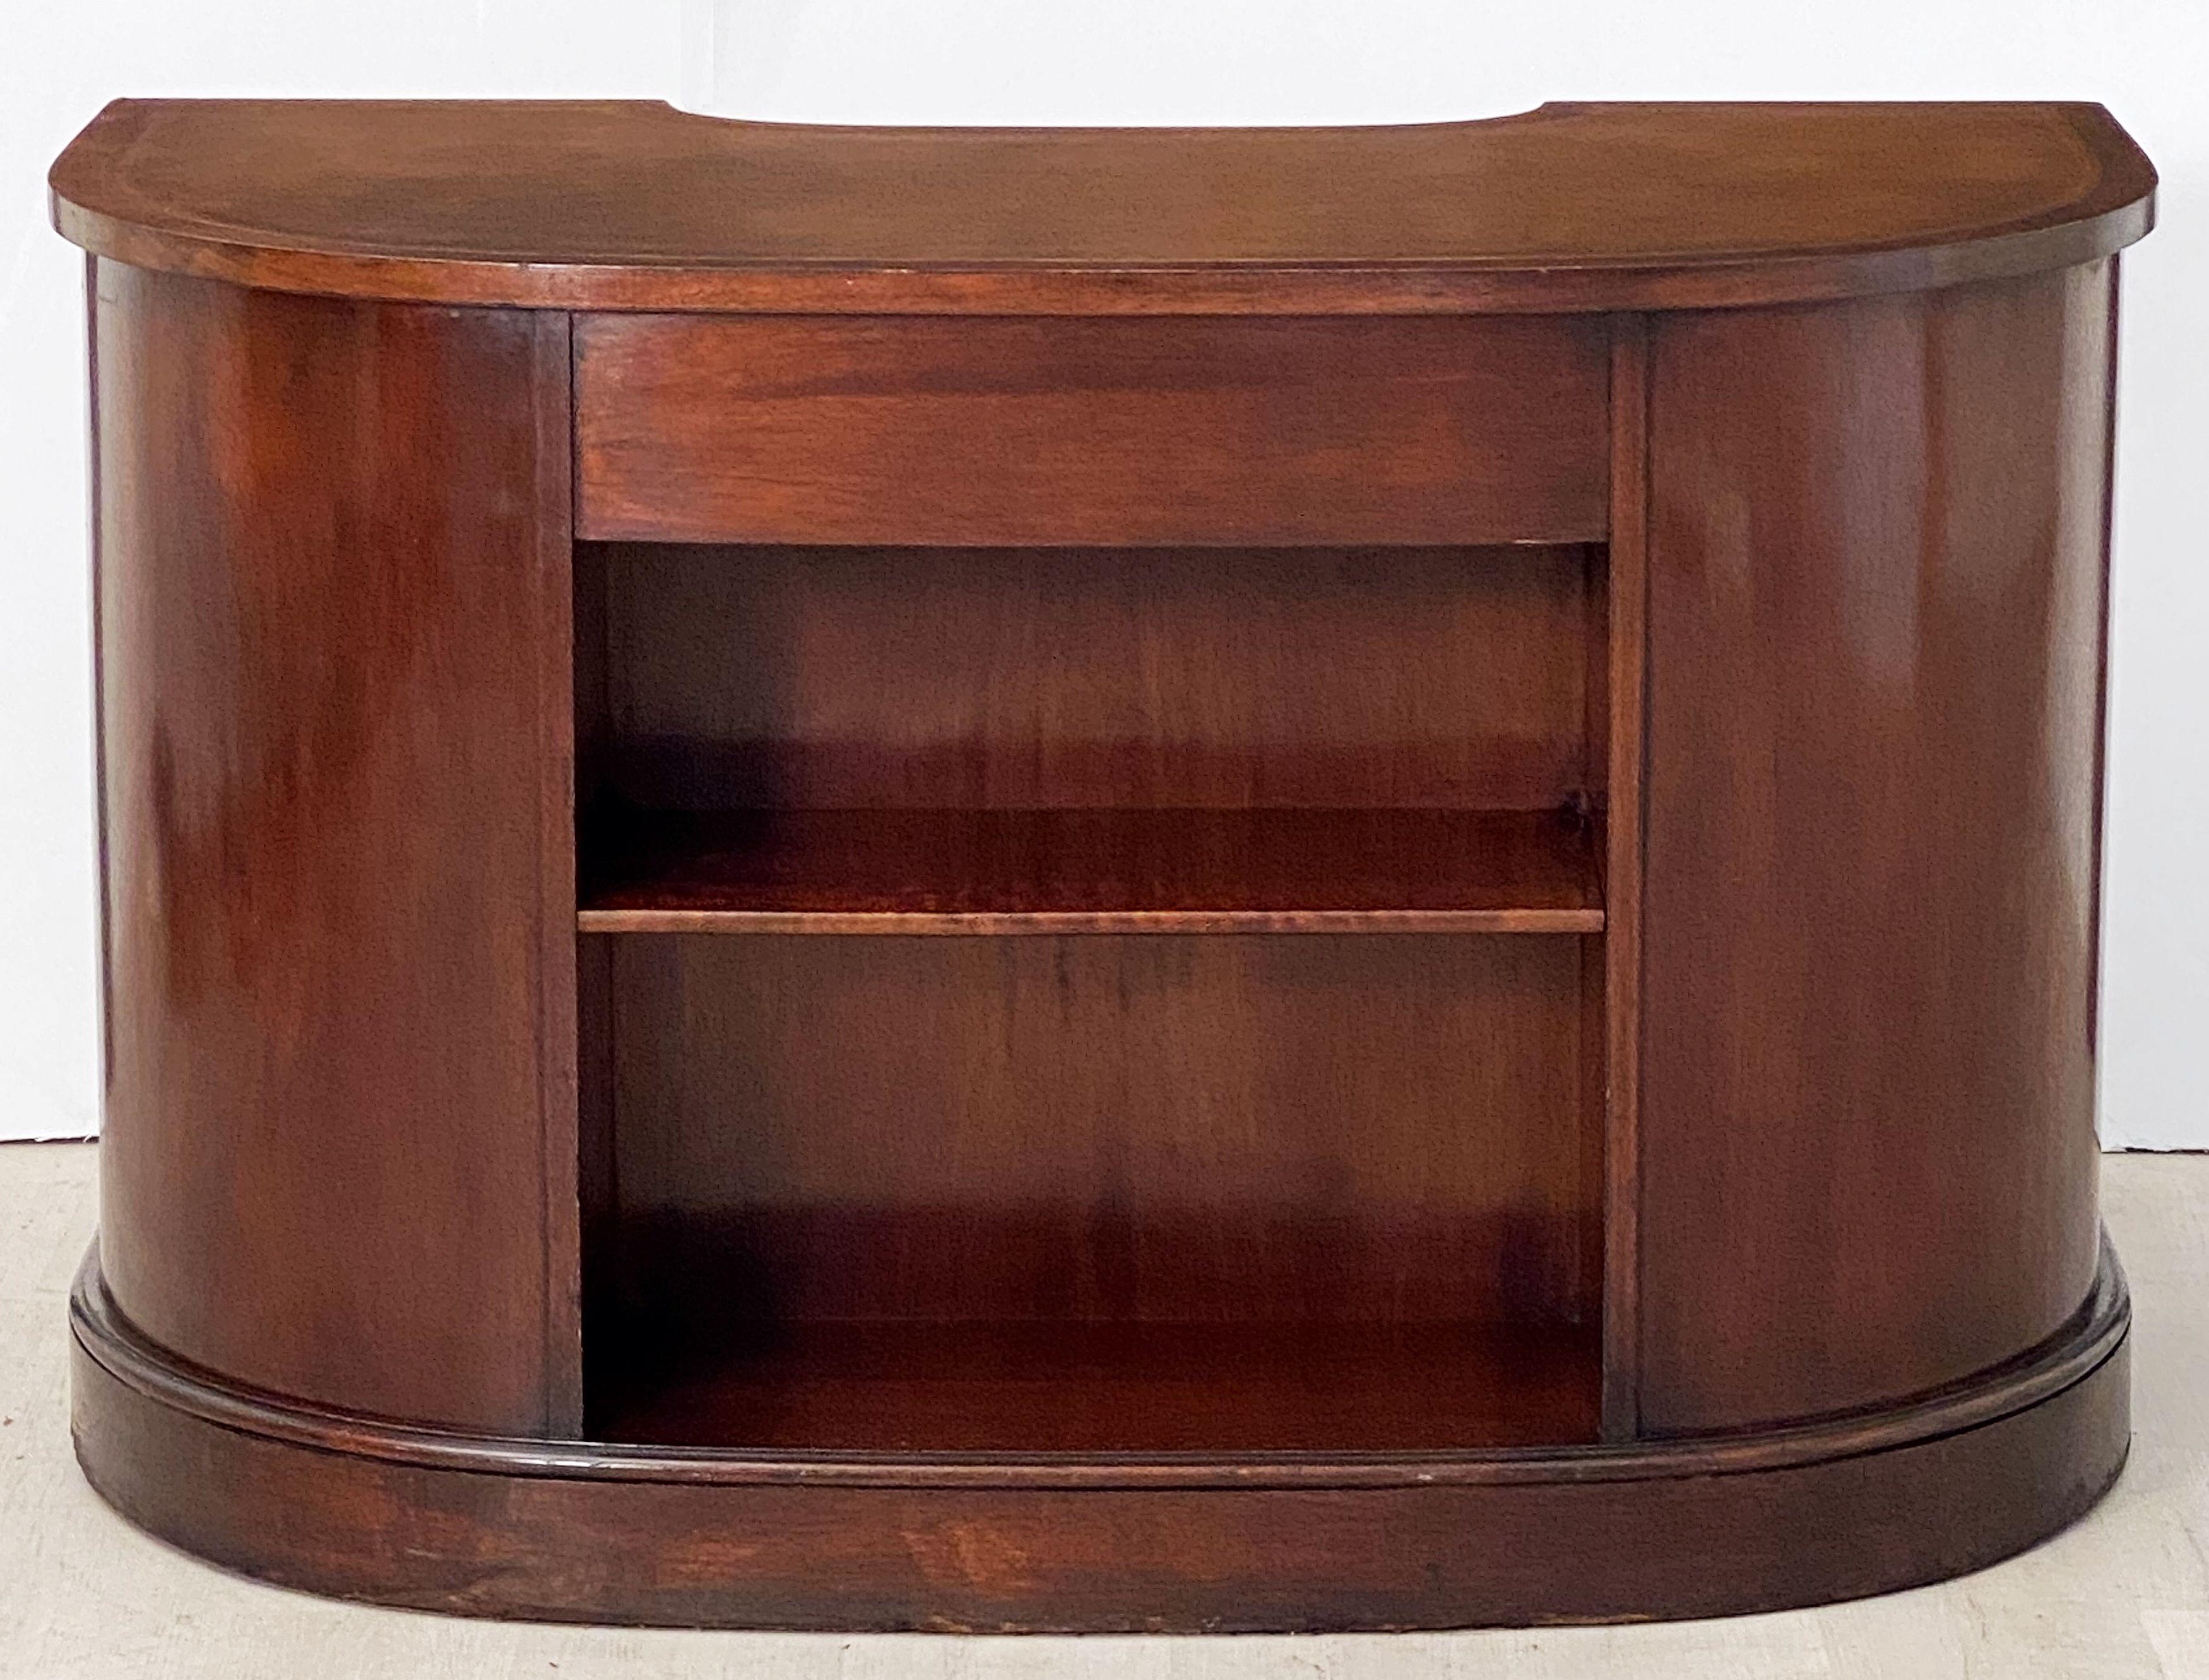 20th Century English Kidney Shaped Kneehole Writing Desk of Mahogany with Leather Top For Sale